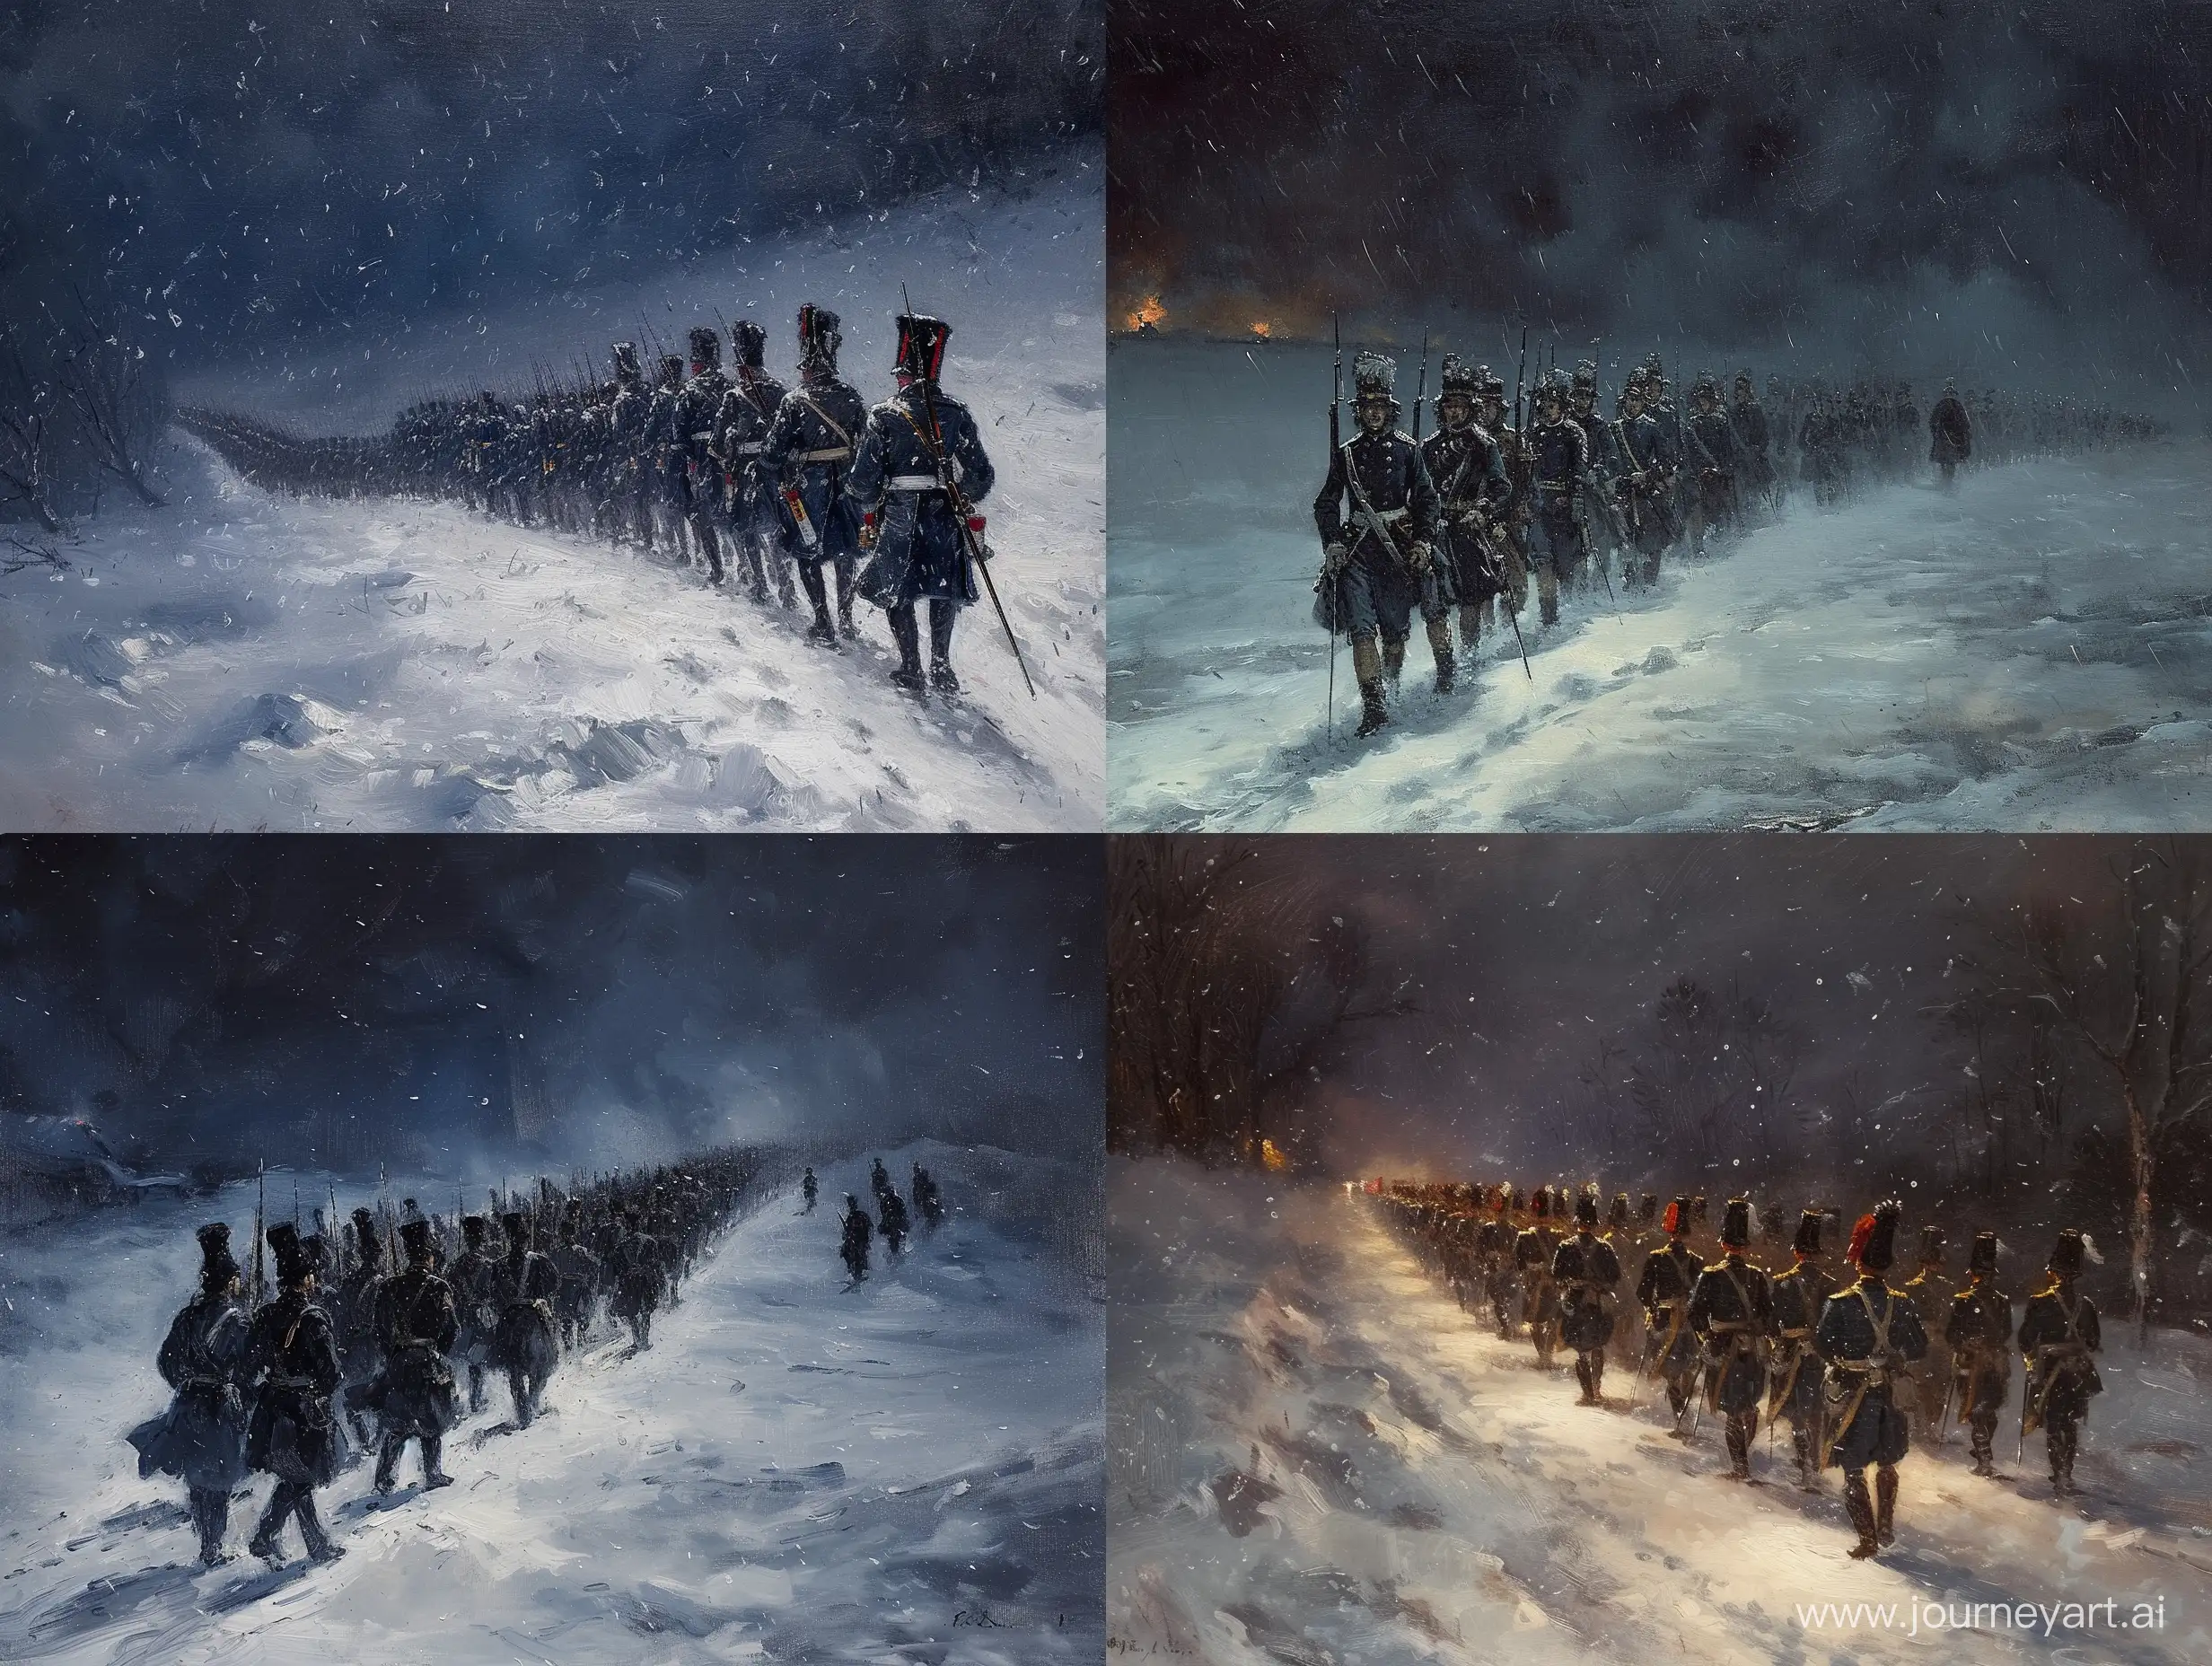 French-Soldiers-Marching-in-Blizzard-19th-Century-Convoy-at-Night